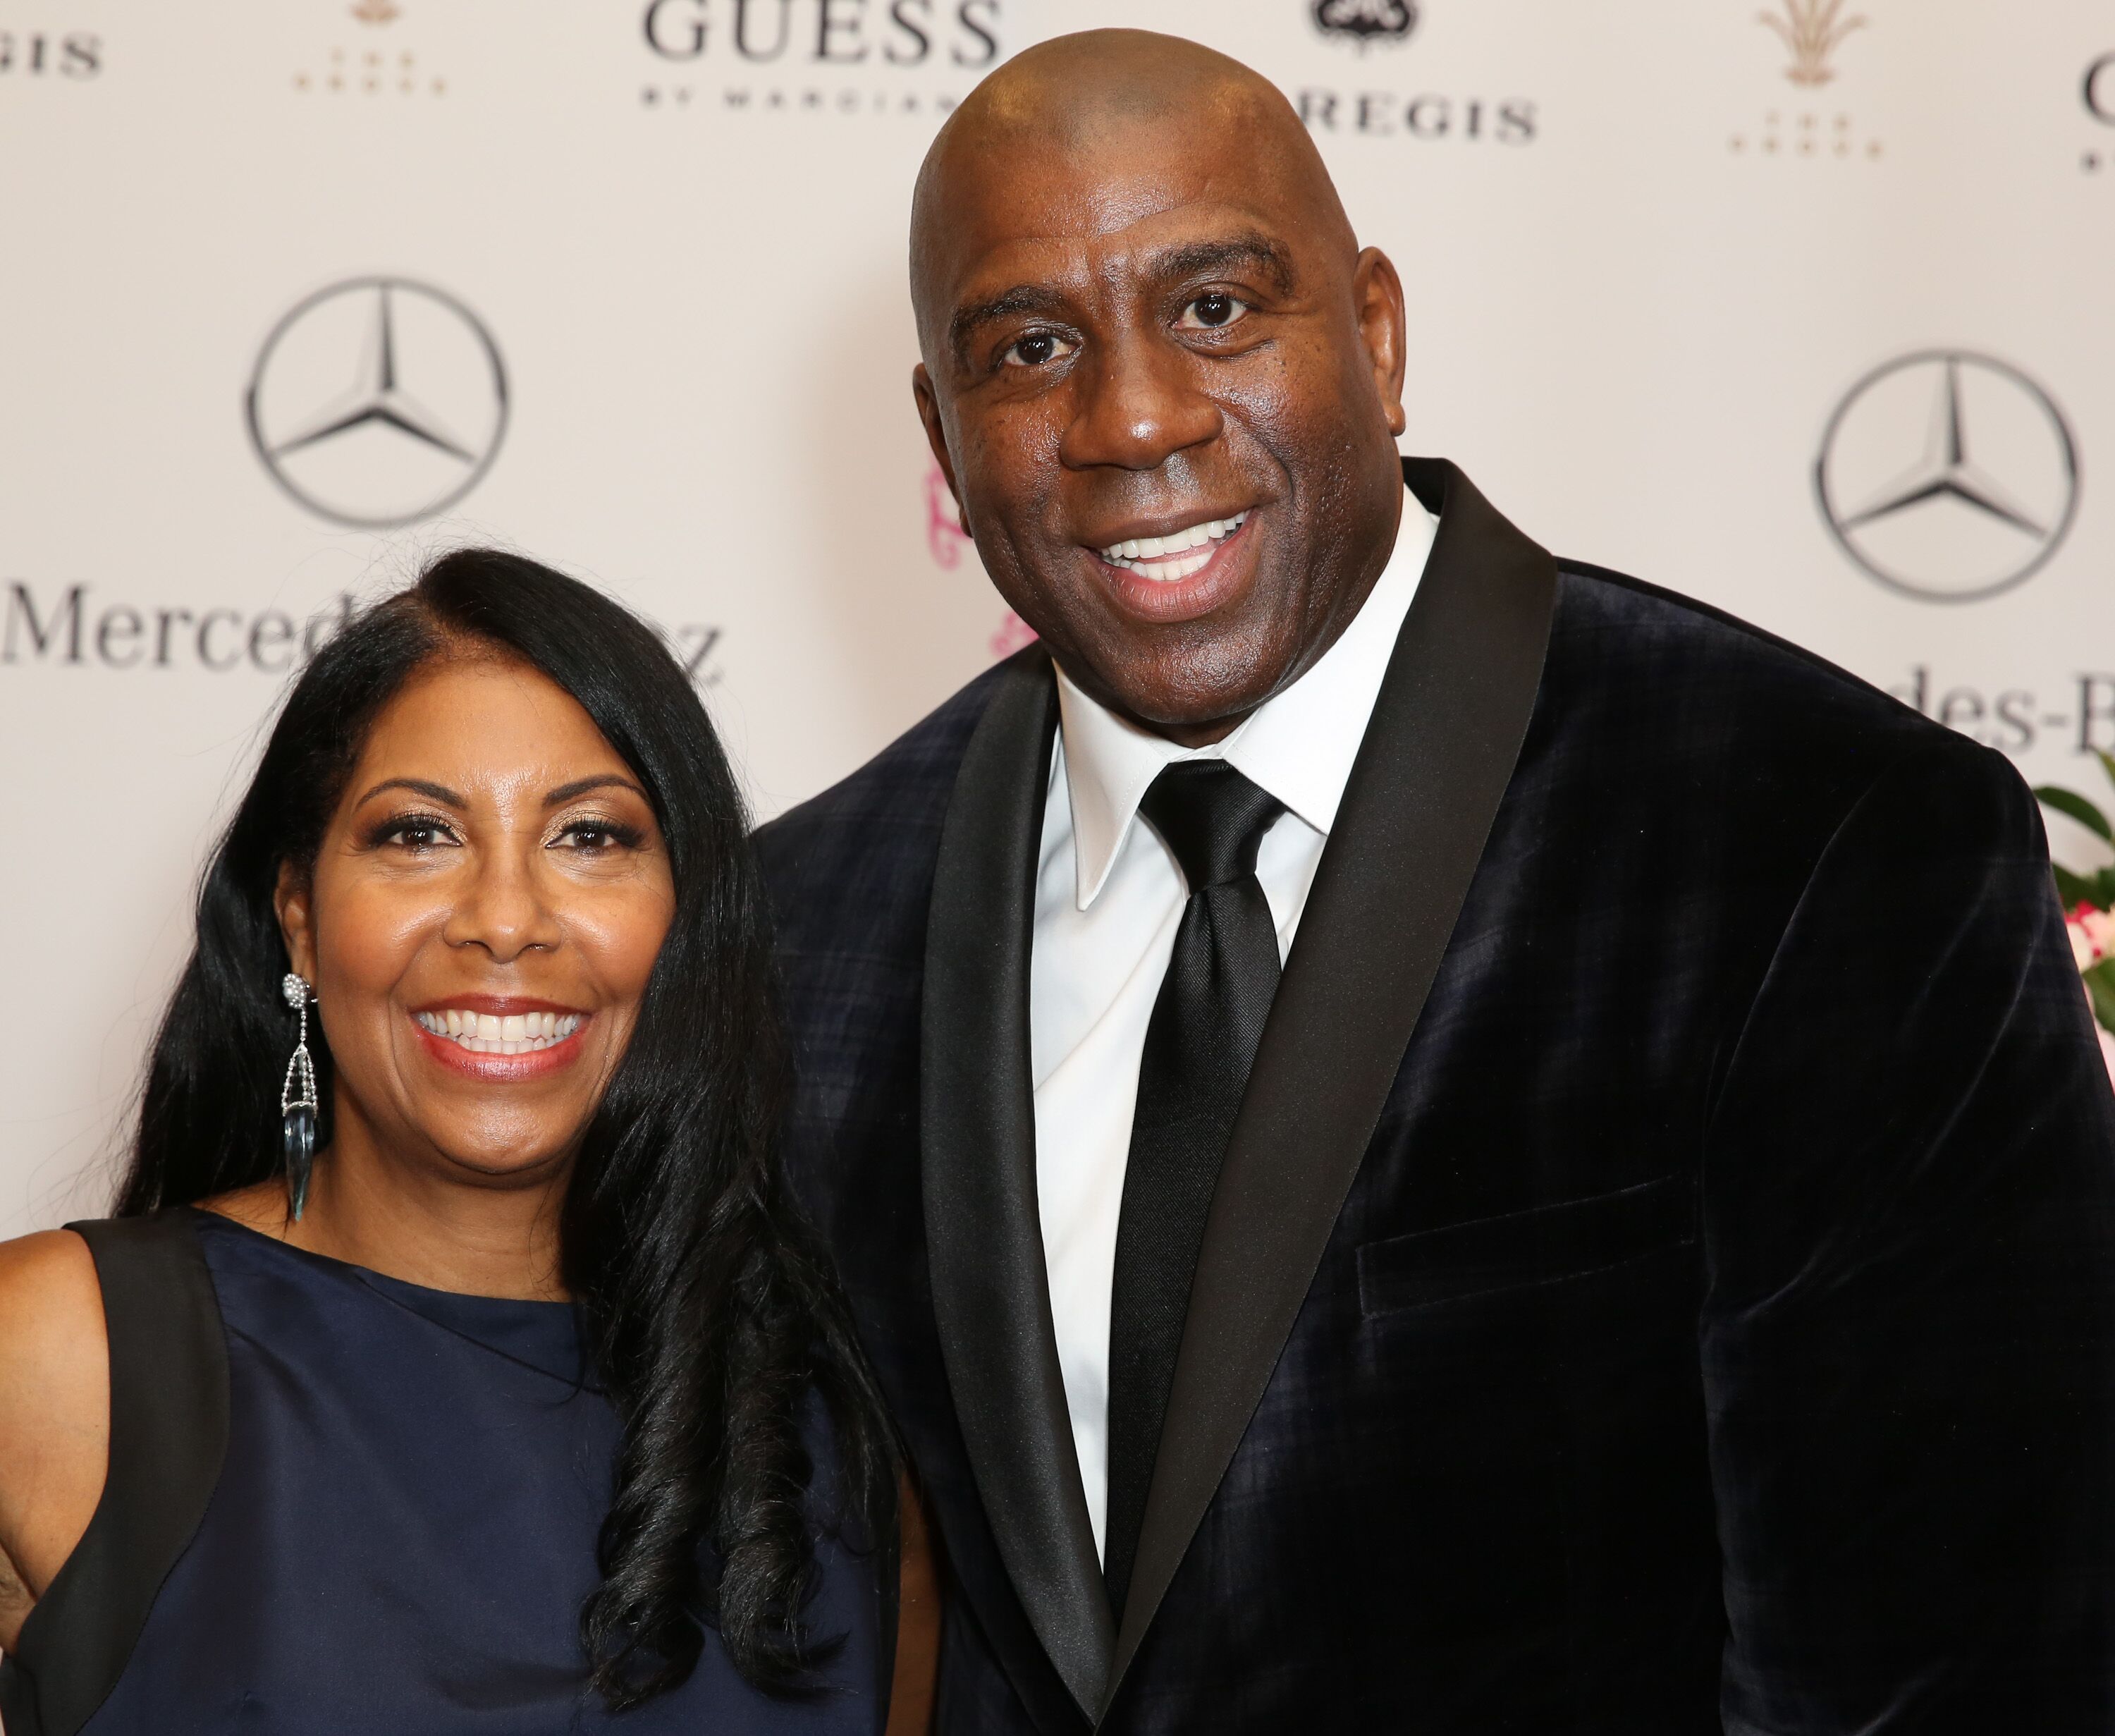 Cookie Johnson and honoree Earvin 'Magic' Johnson attend Mercedes-Benz presents the Carousel of Hope Ball benefitting Barbara Davis Center. | Source: Getty Images